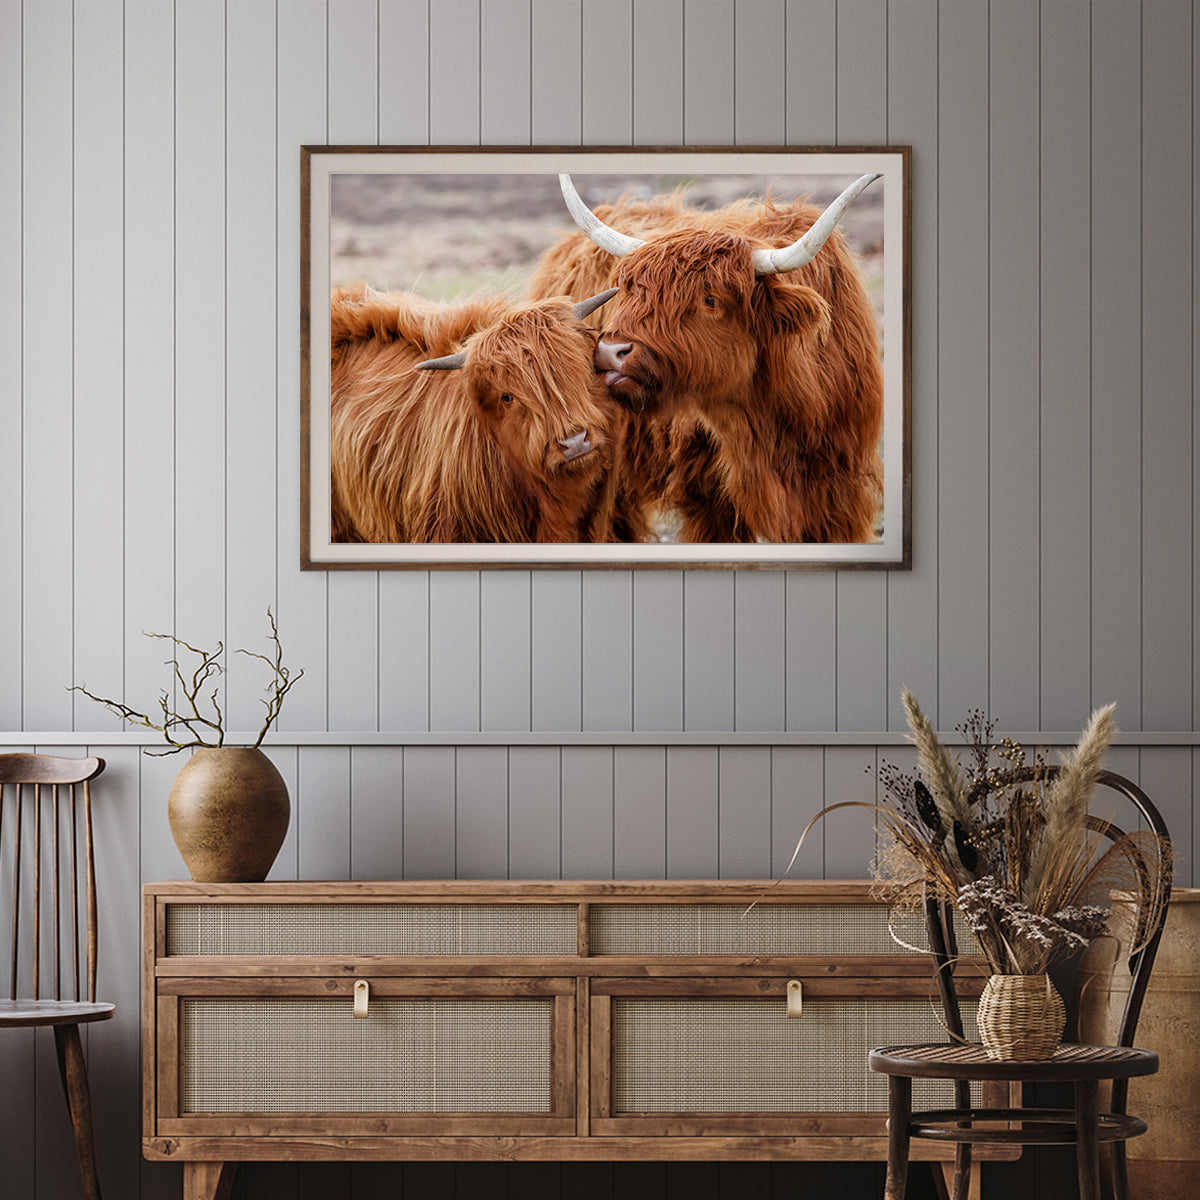 Highland Сow Сattle Family Poster Prints Wall Art-Horizontal Posters NOT FRAMED-CetArt-10″x8″ inches-CetArt